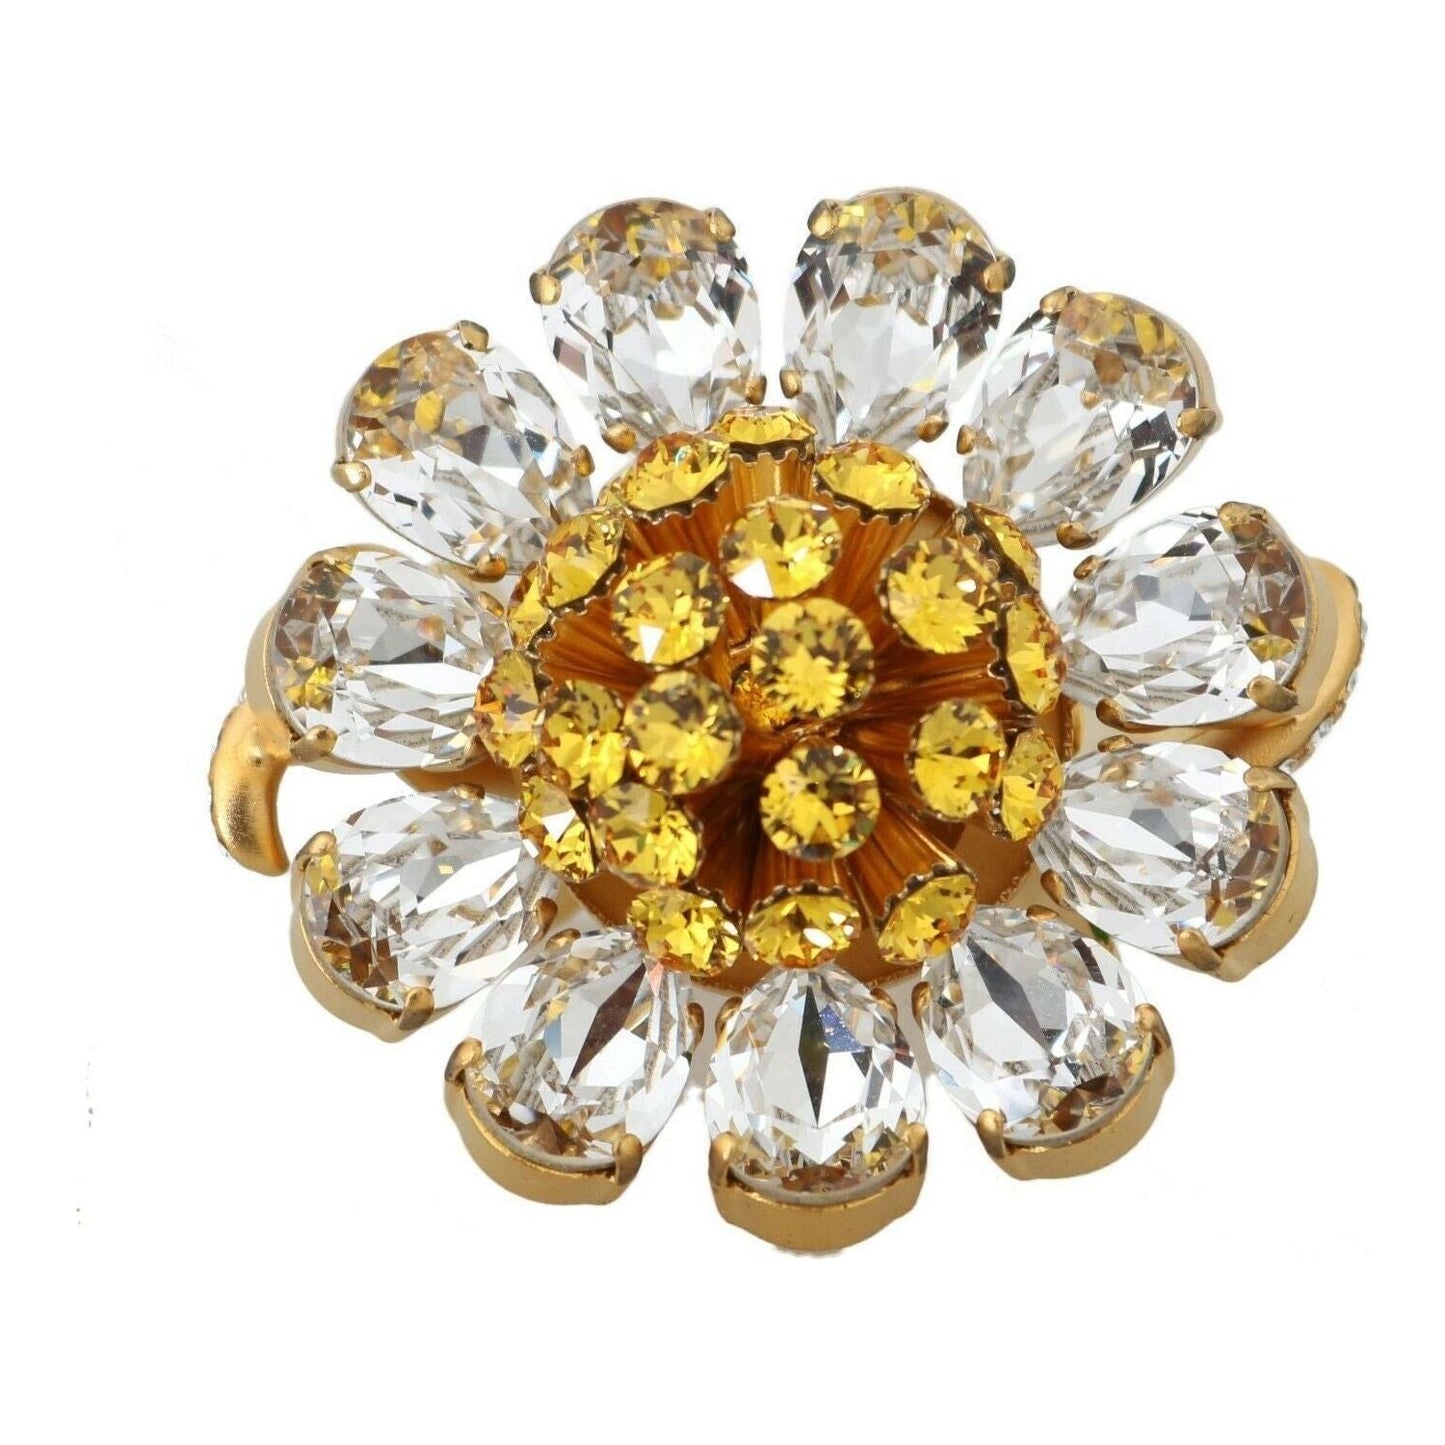 Dolce & Gabbana Crystal Flower Statement Ring Size US 7.5 gold-brass-yellow-crystal-flower-ring s-l1600-21-1-1c6a2578-49c.jpg